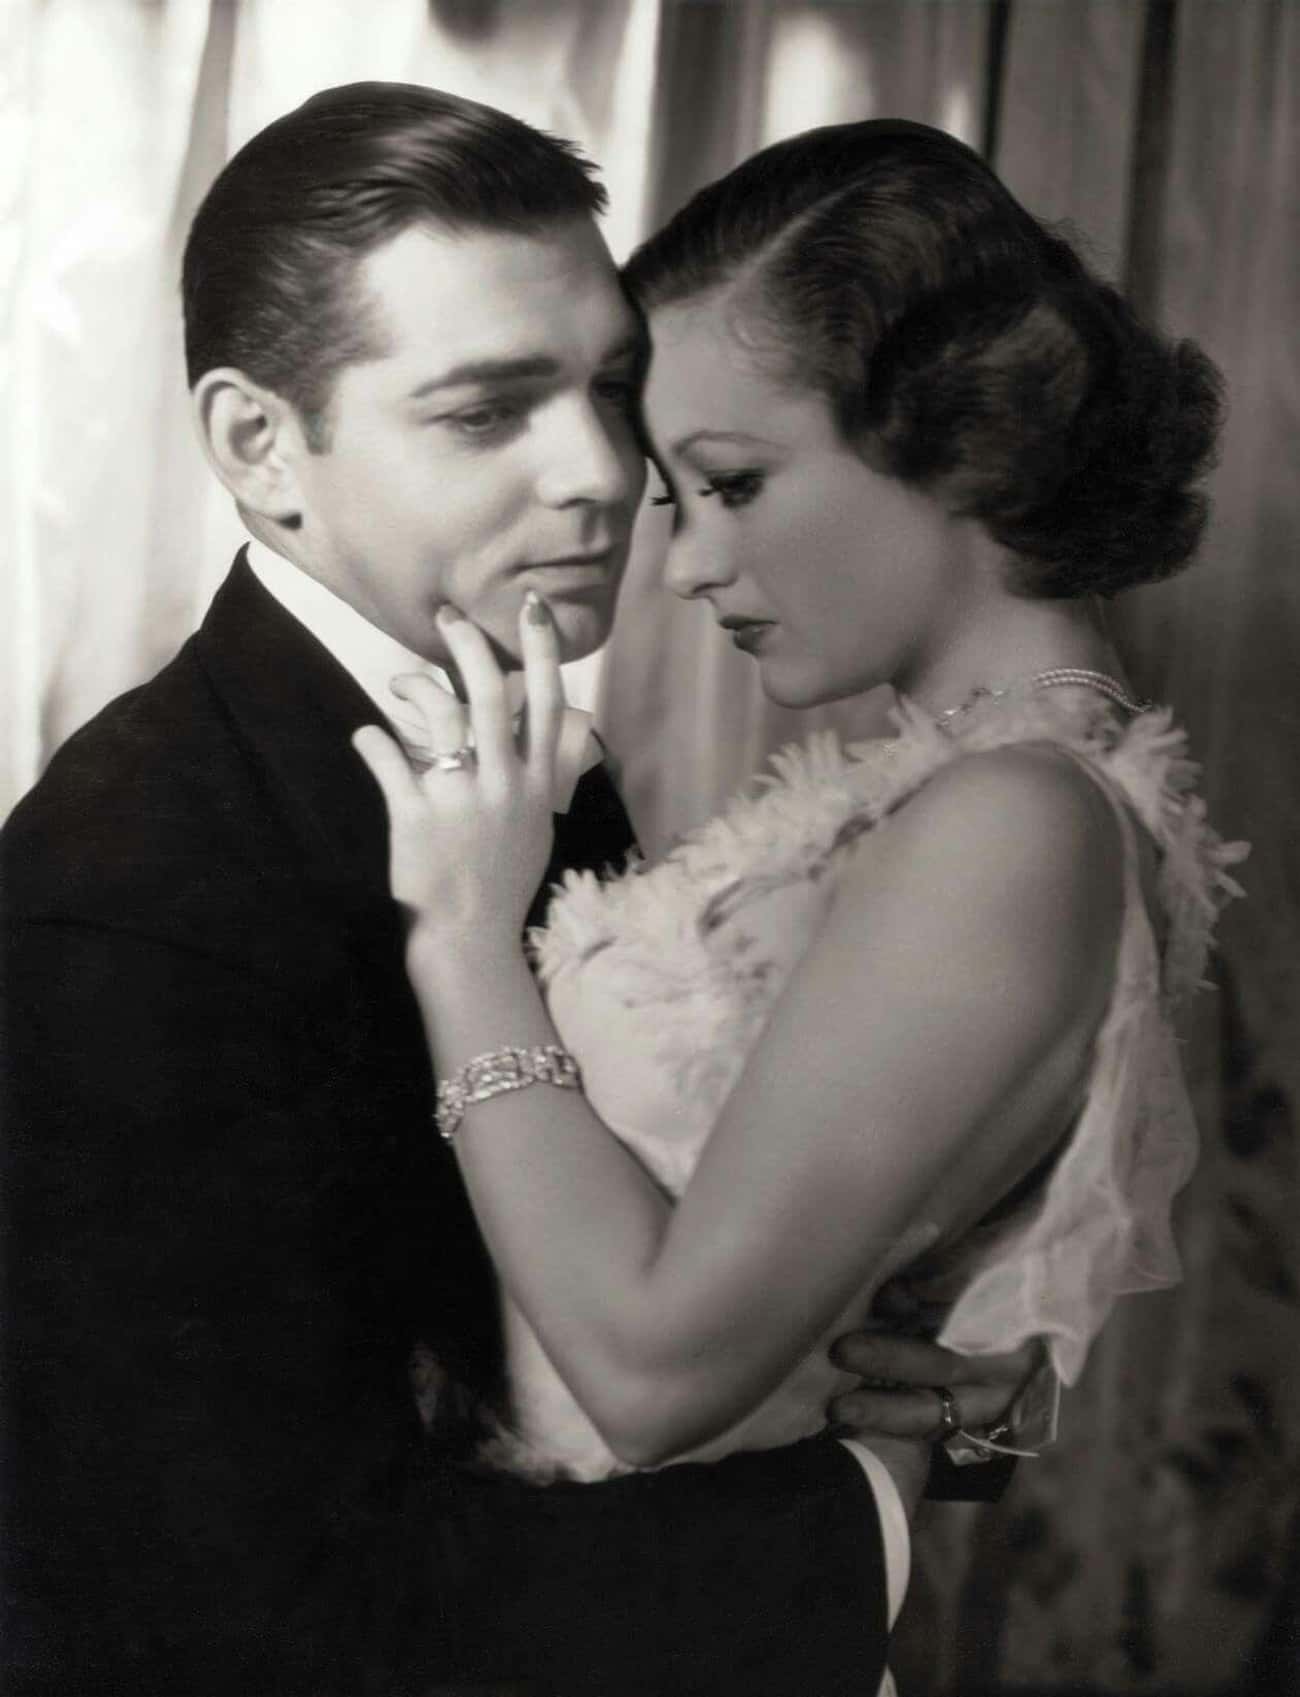 Gable And Joan Crawford Had An On-And-Off Affair For Many Years